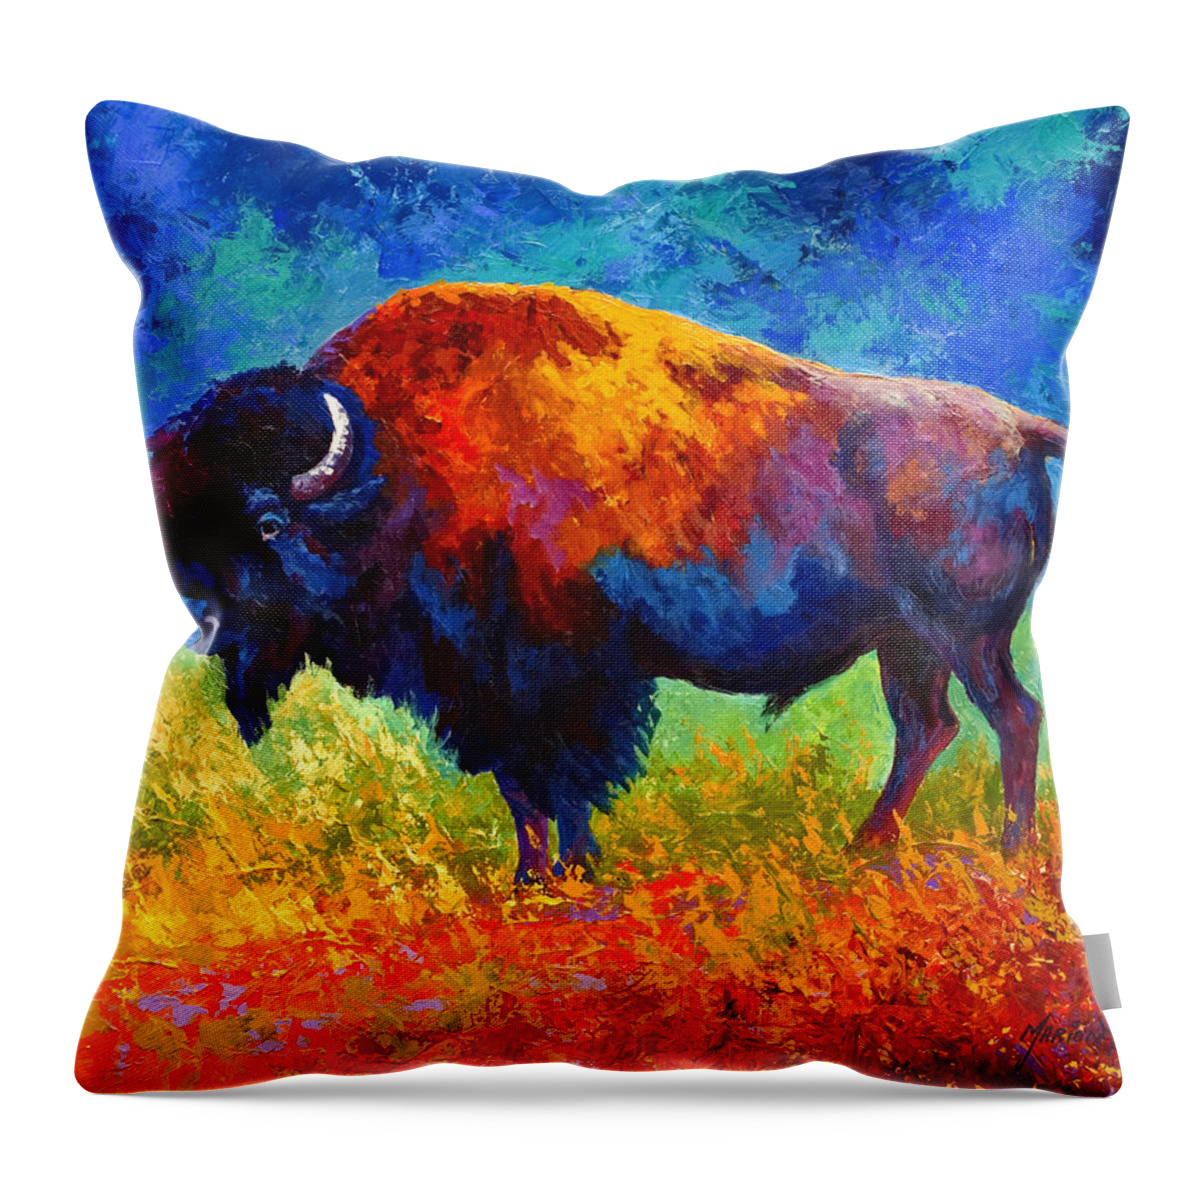 Wildlife Throw Pillow featuring the painting Master Of His Herd by Marion Rose